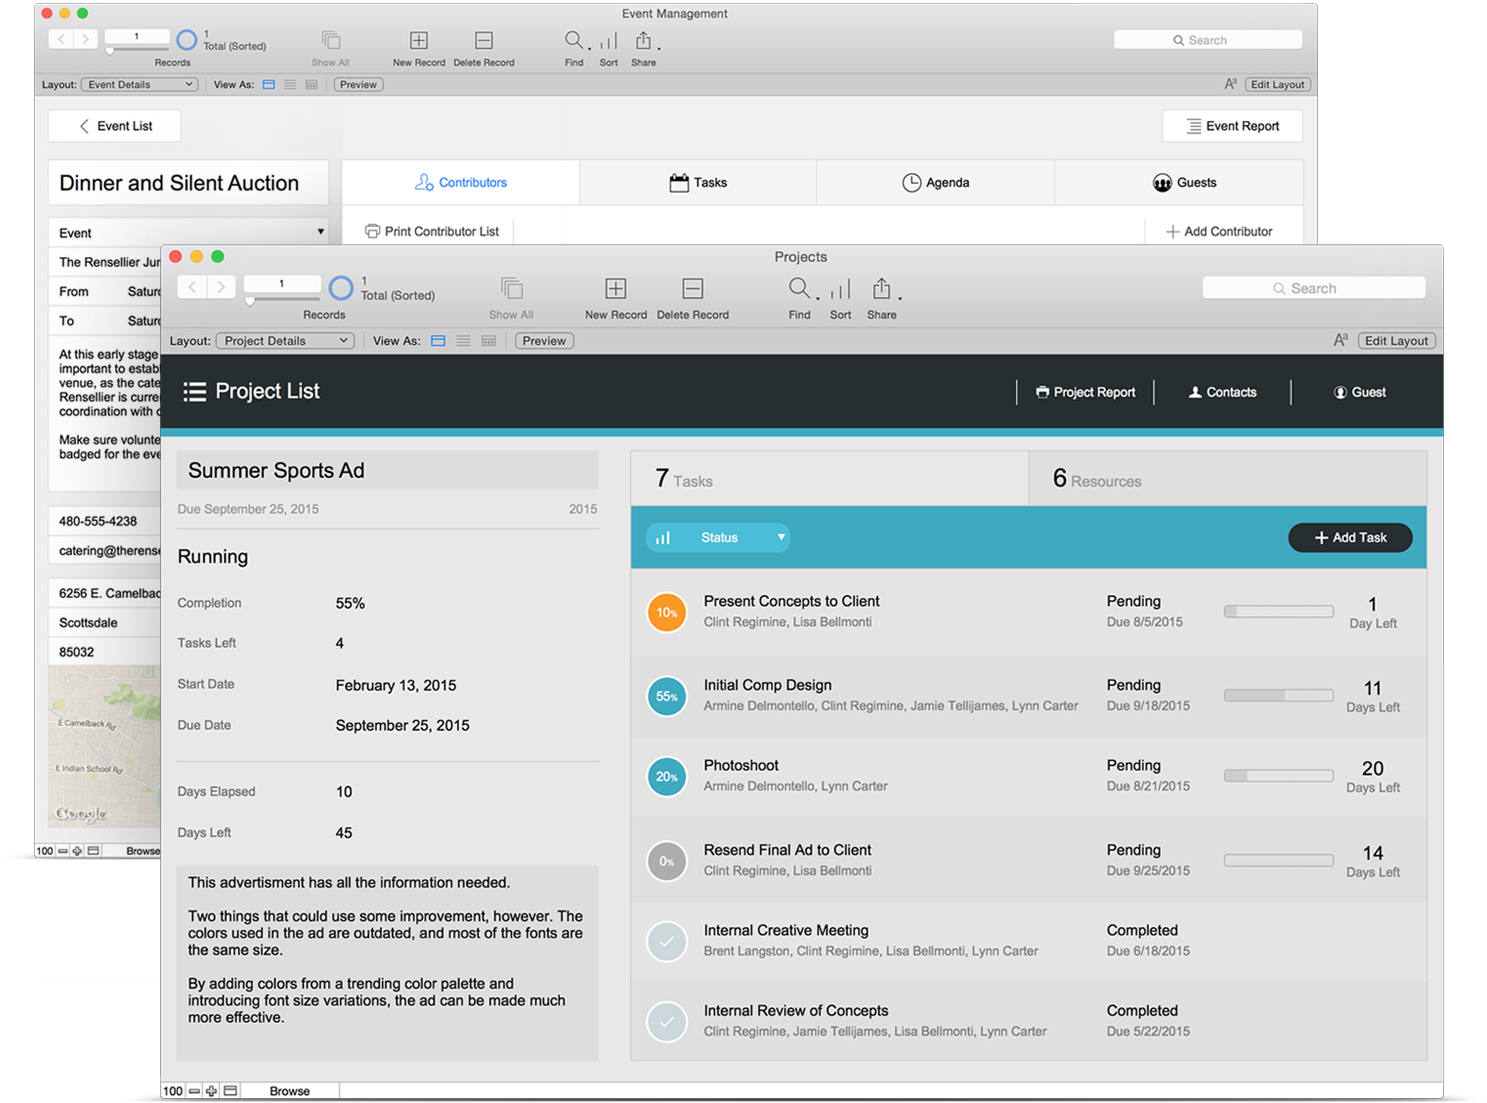 filemaker pro and outlook for mac email